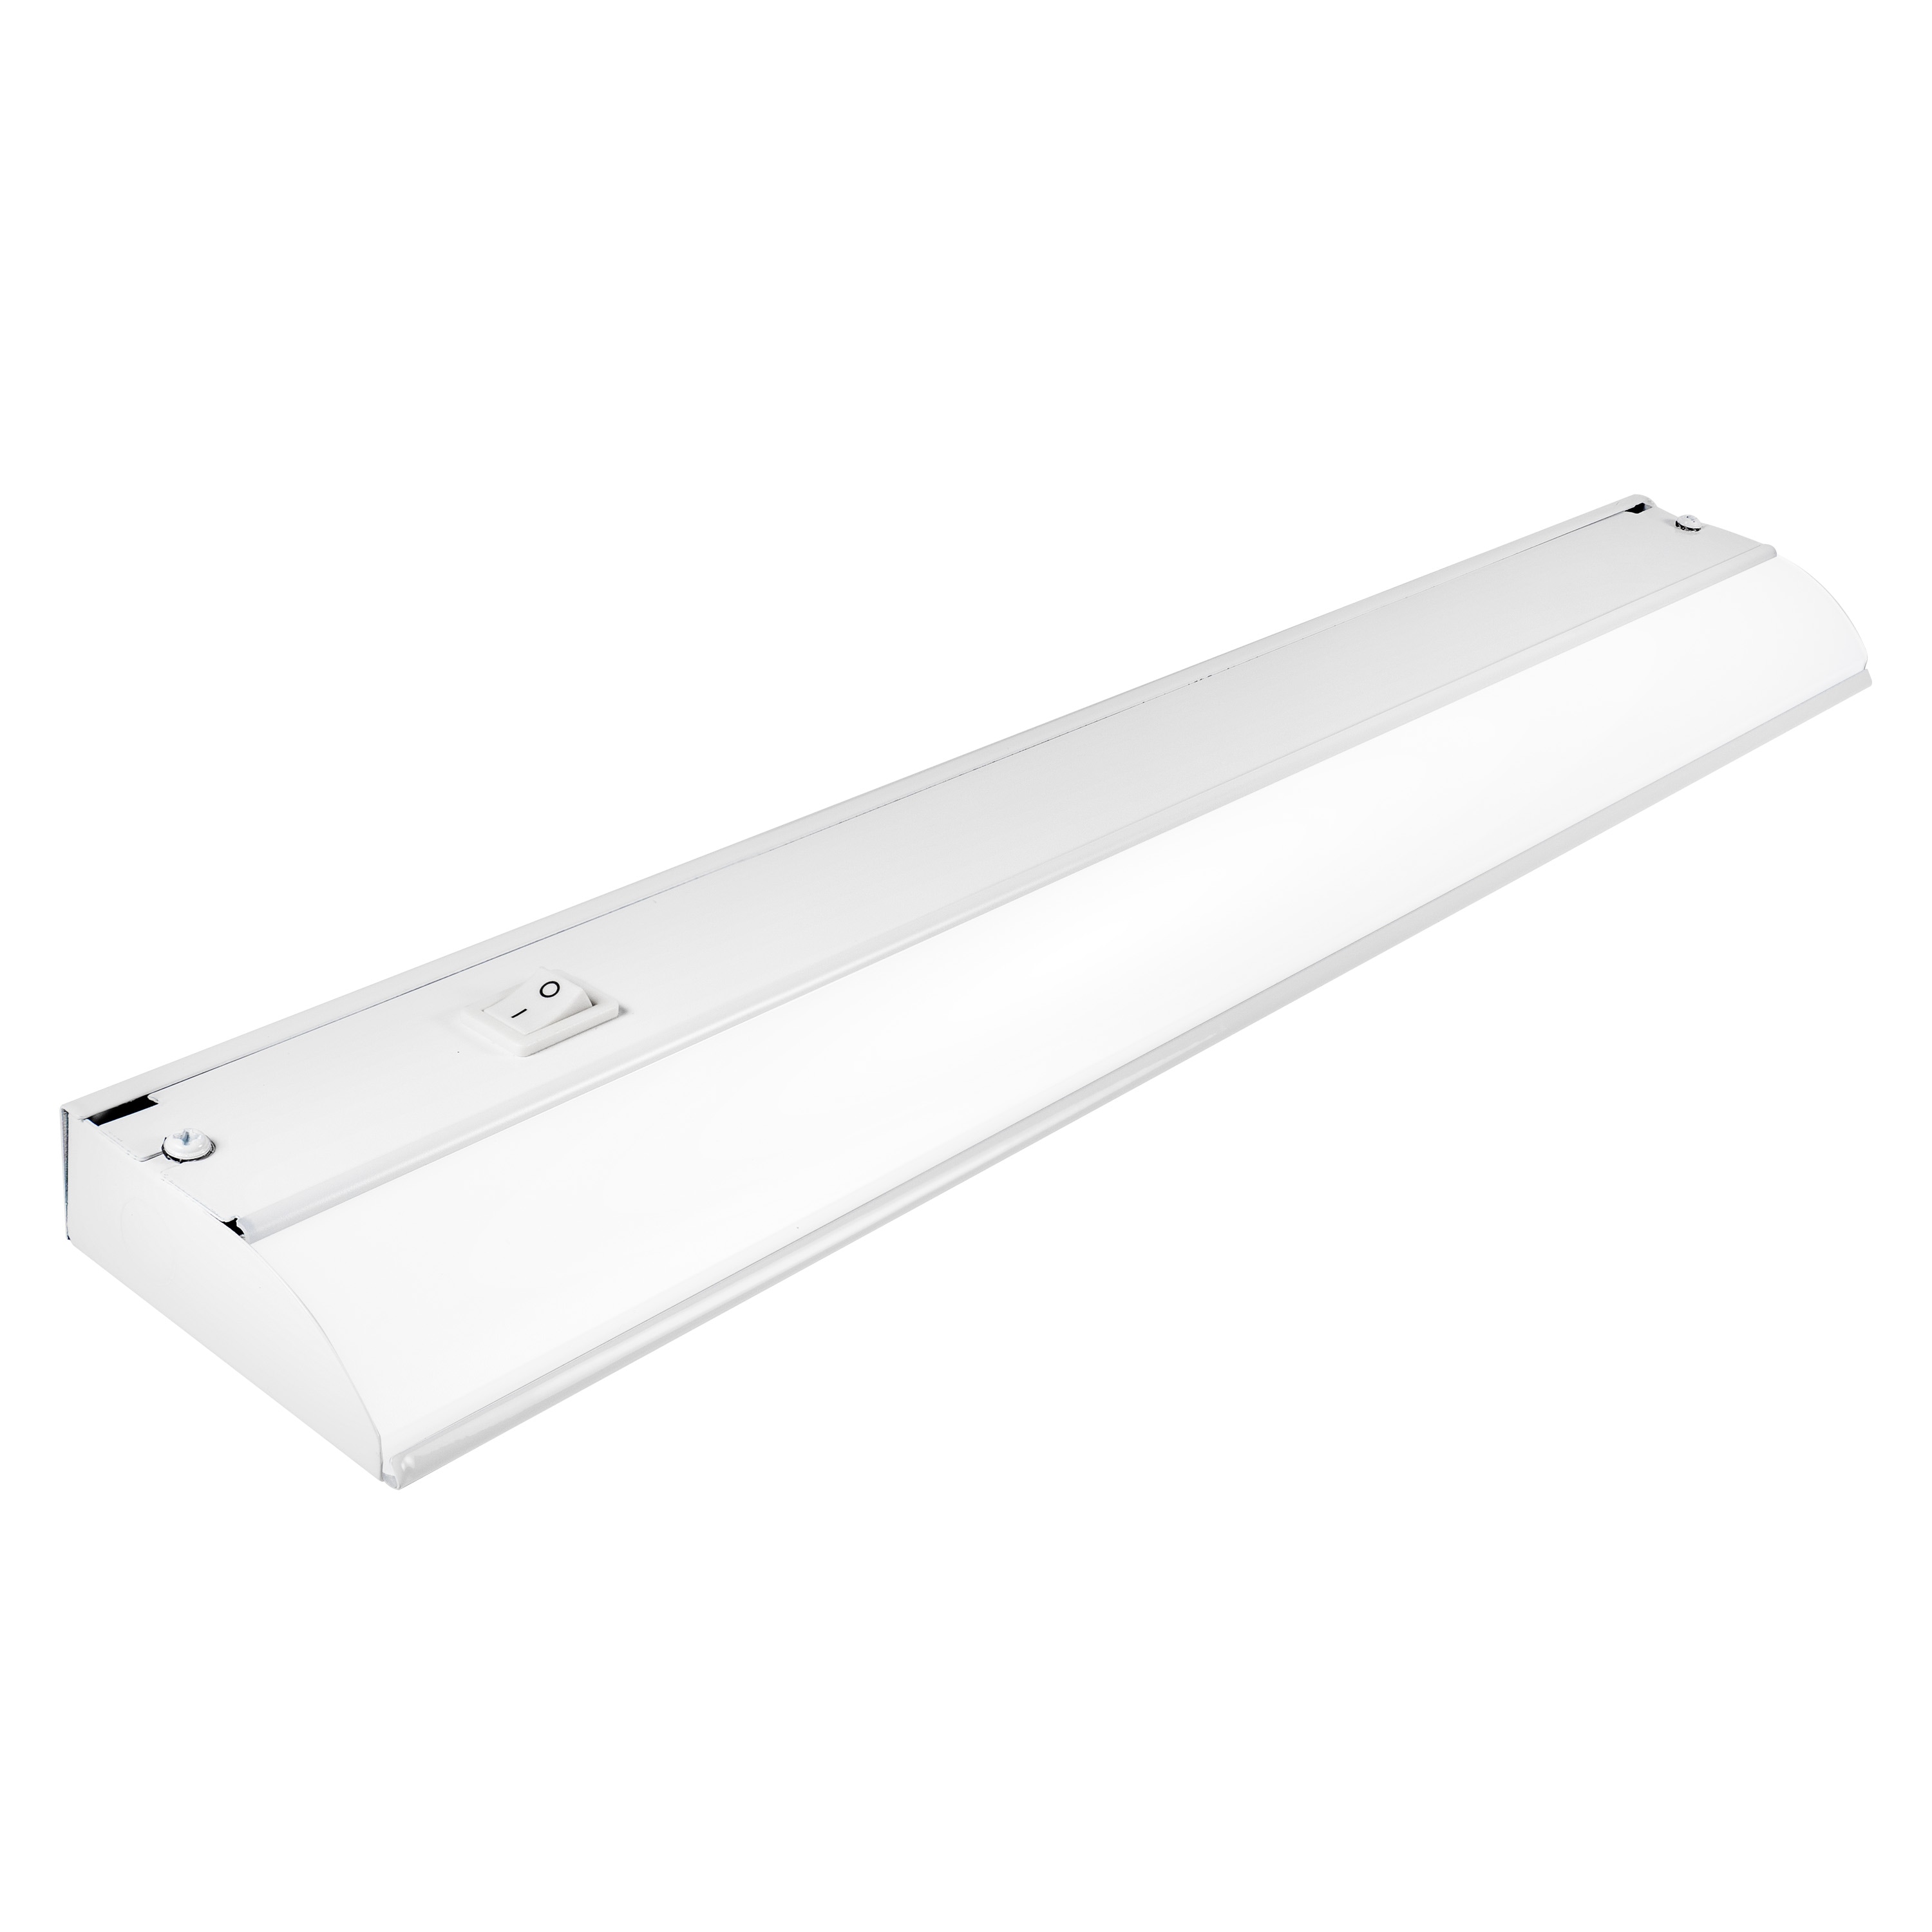 Soft Warm White Premium Linkable LED Under Cabinet Lighting Fixture Details about   18 in 